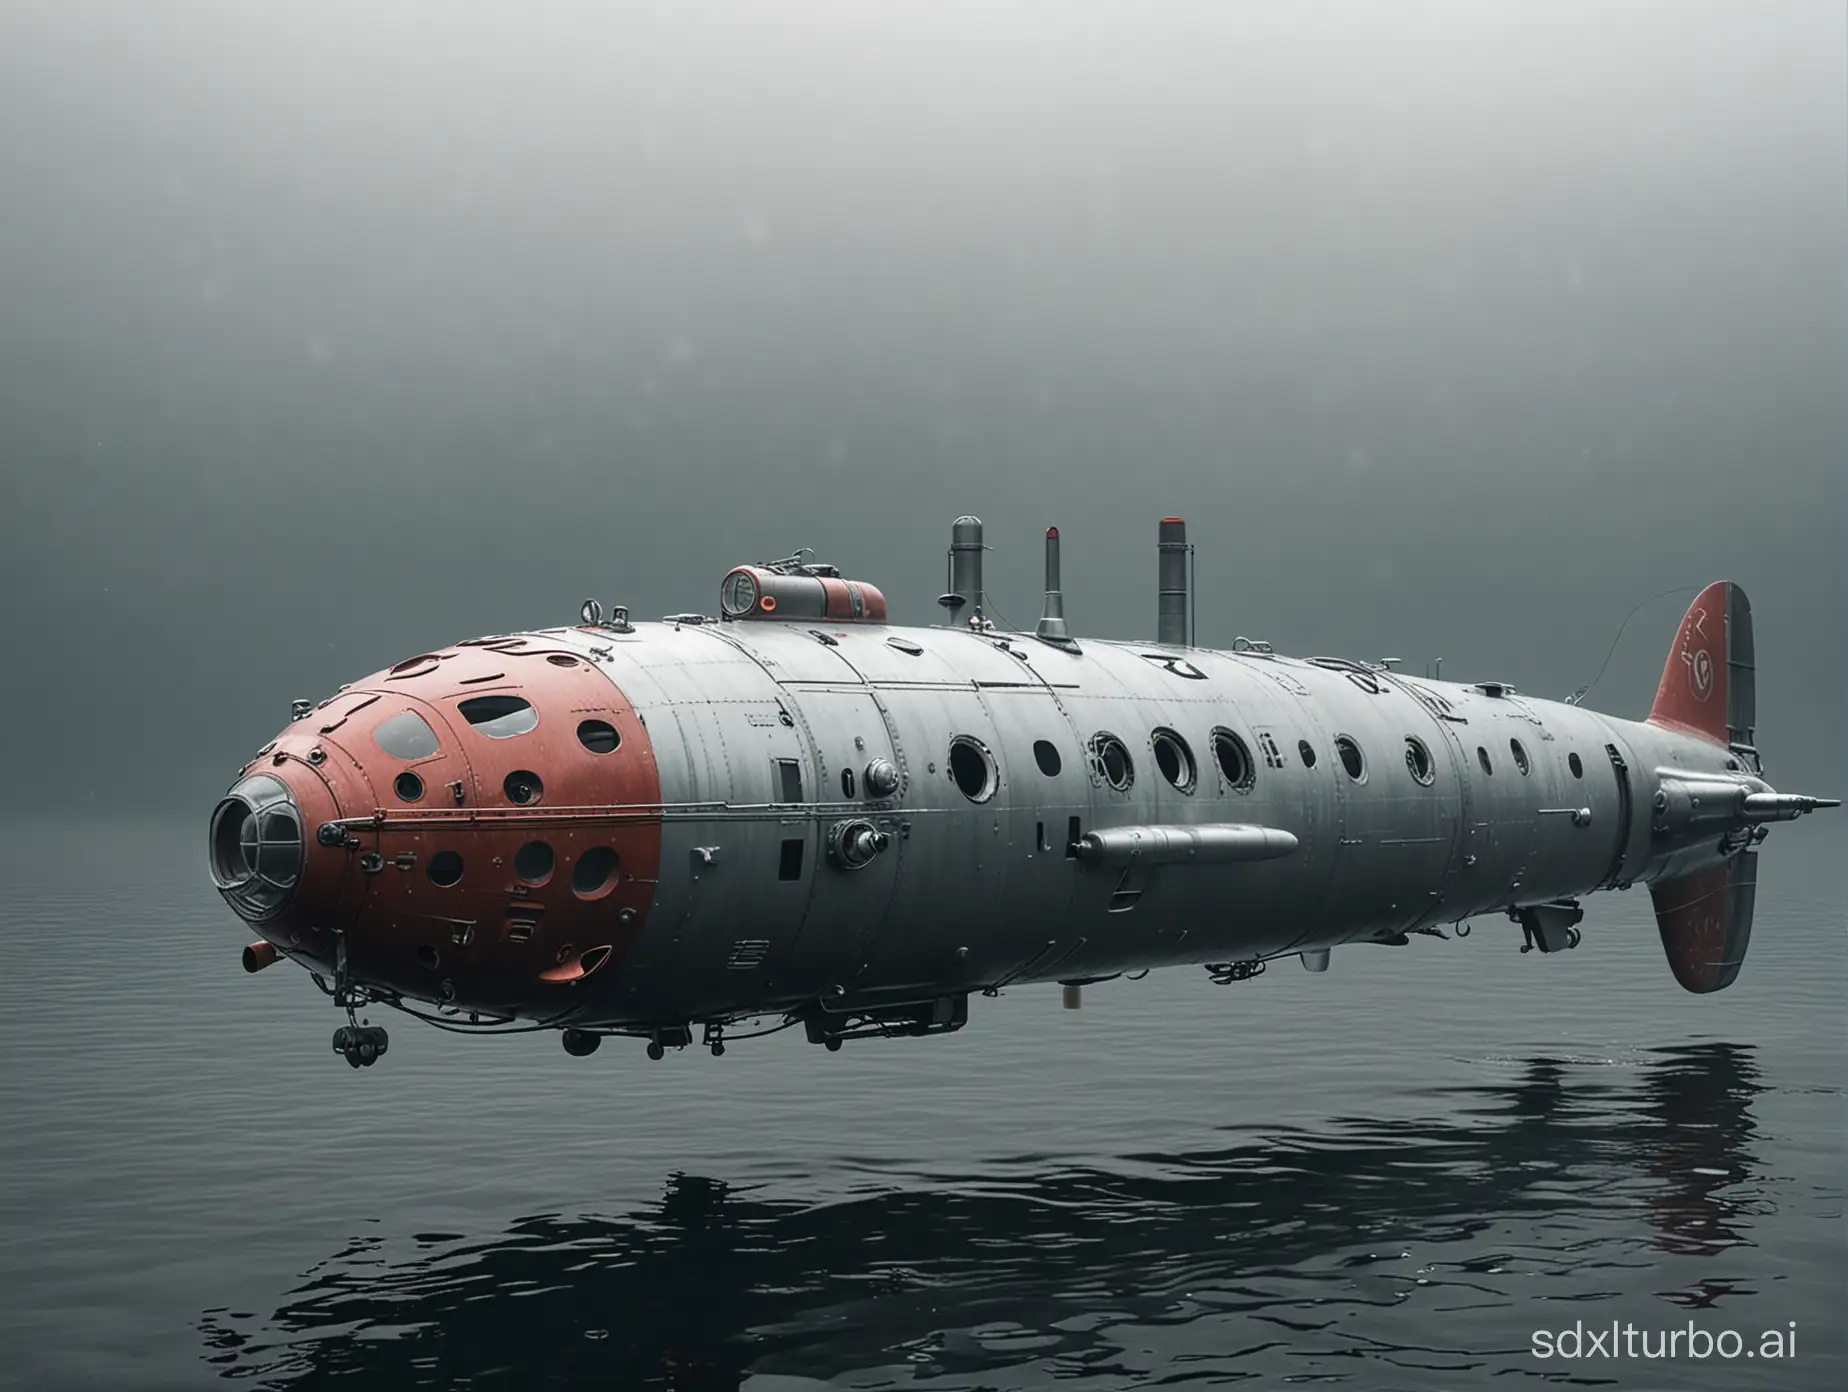 The Dragon submersible